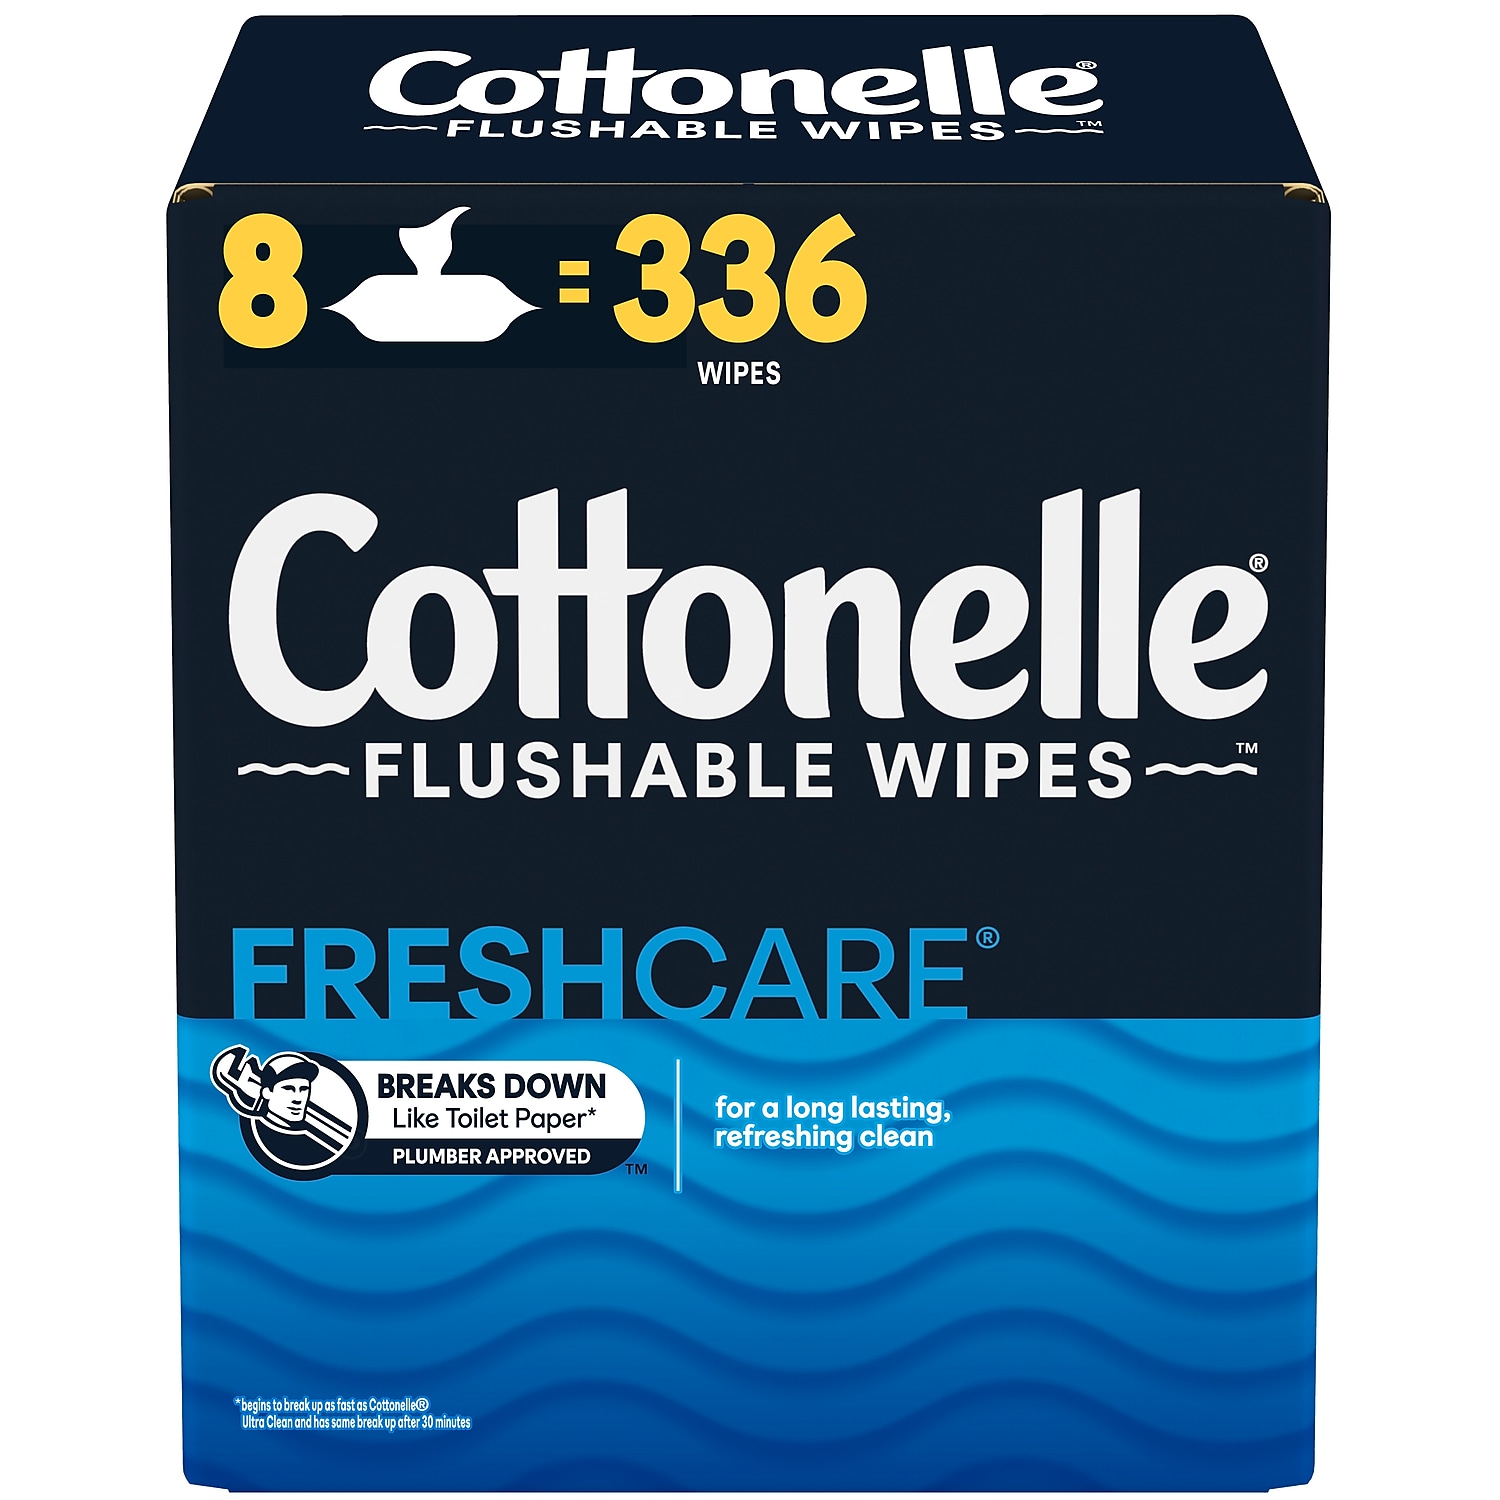 Cottonelle Flushable Toilet Paper Wipe White 42 Sheets/Pack 8 Packs/Carton (51826) - image 1 of 8